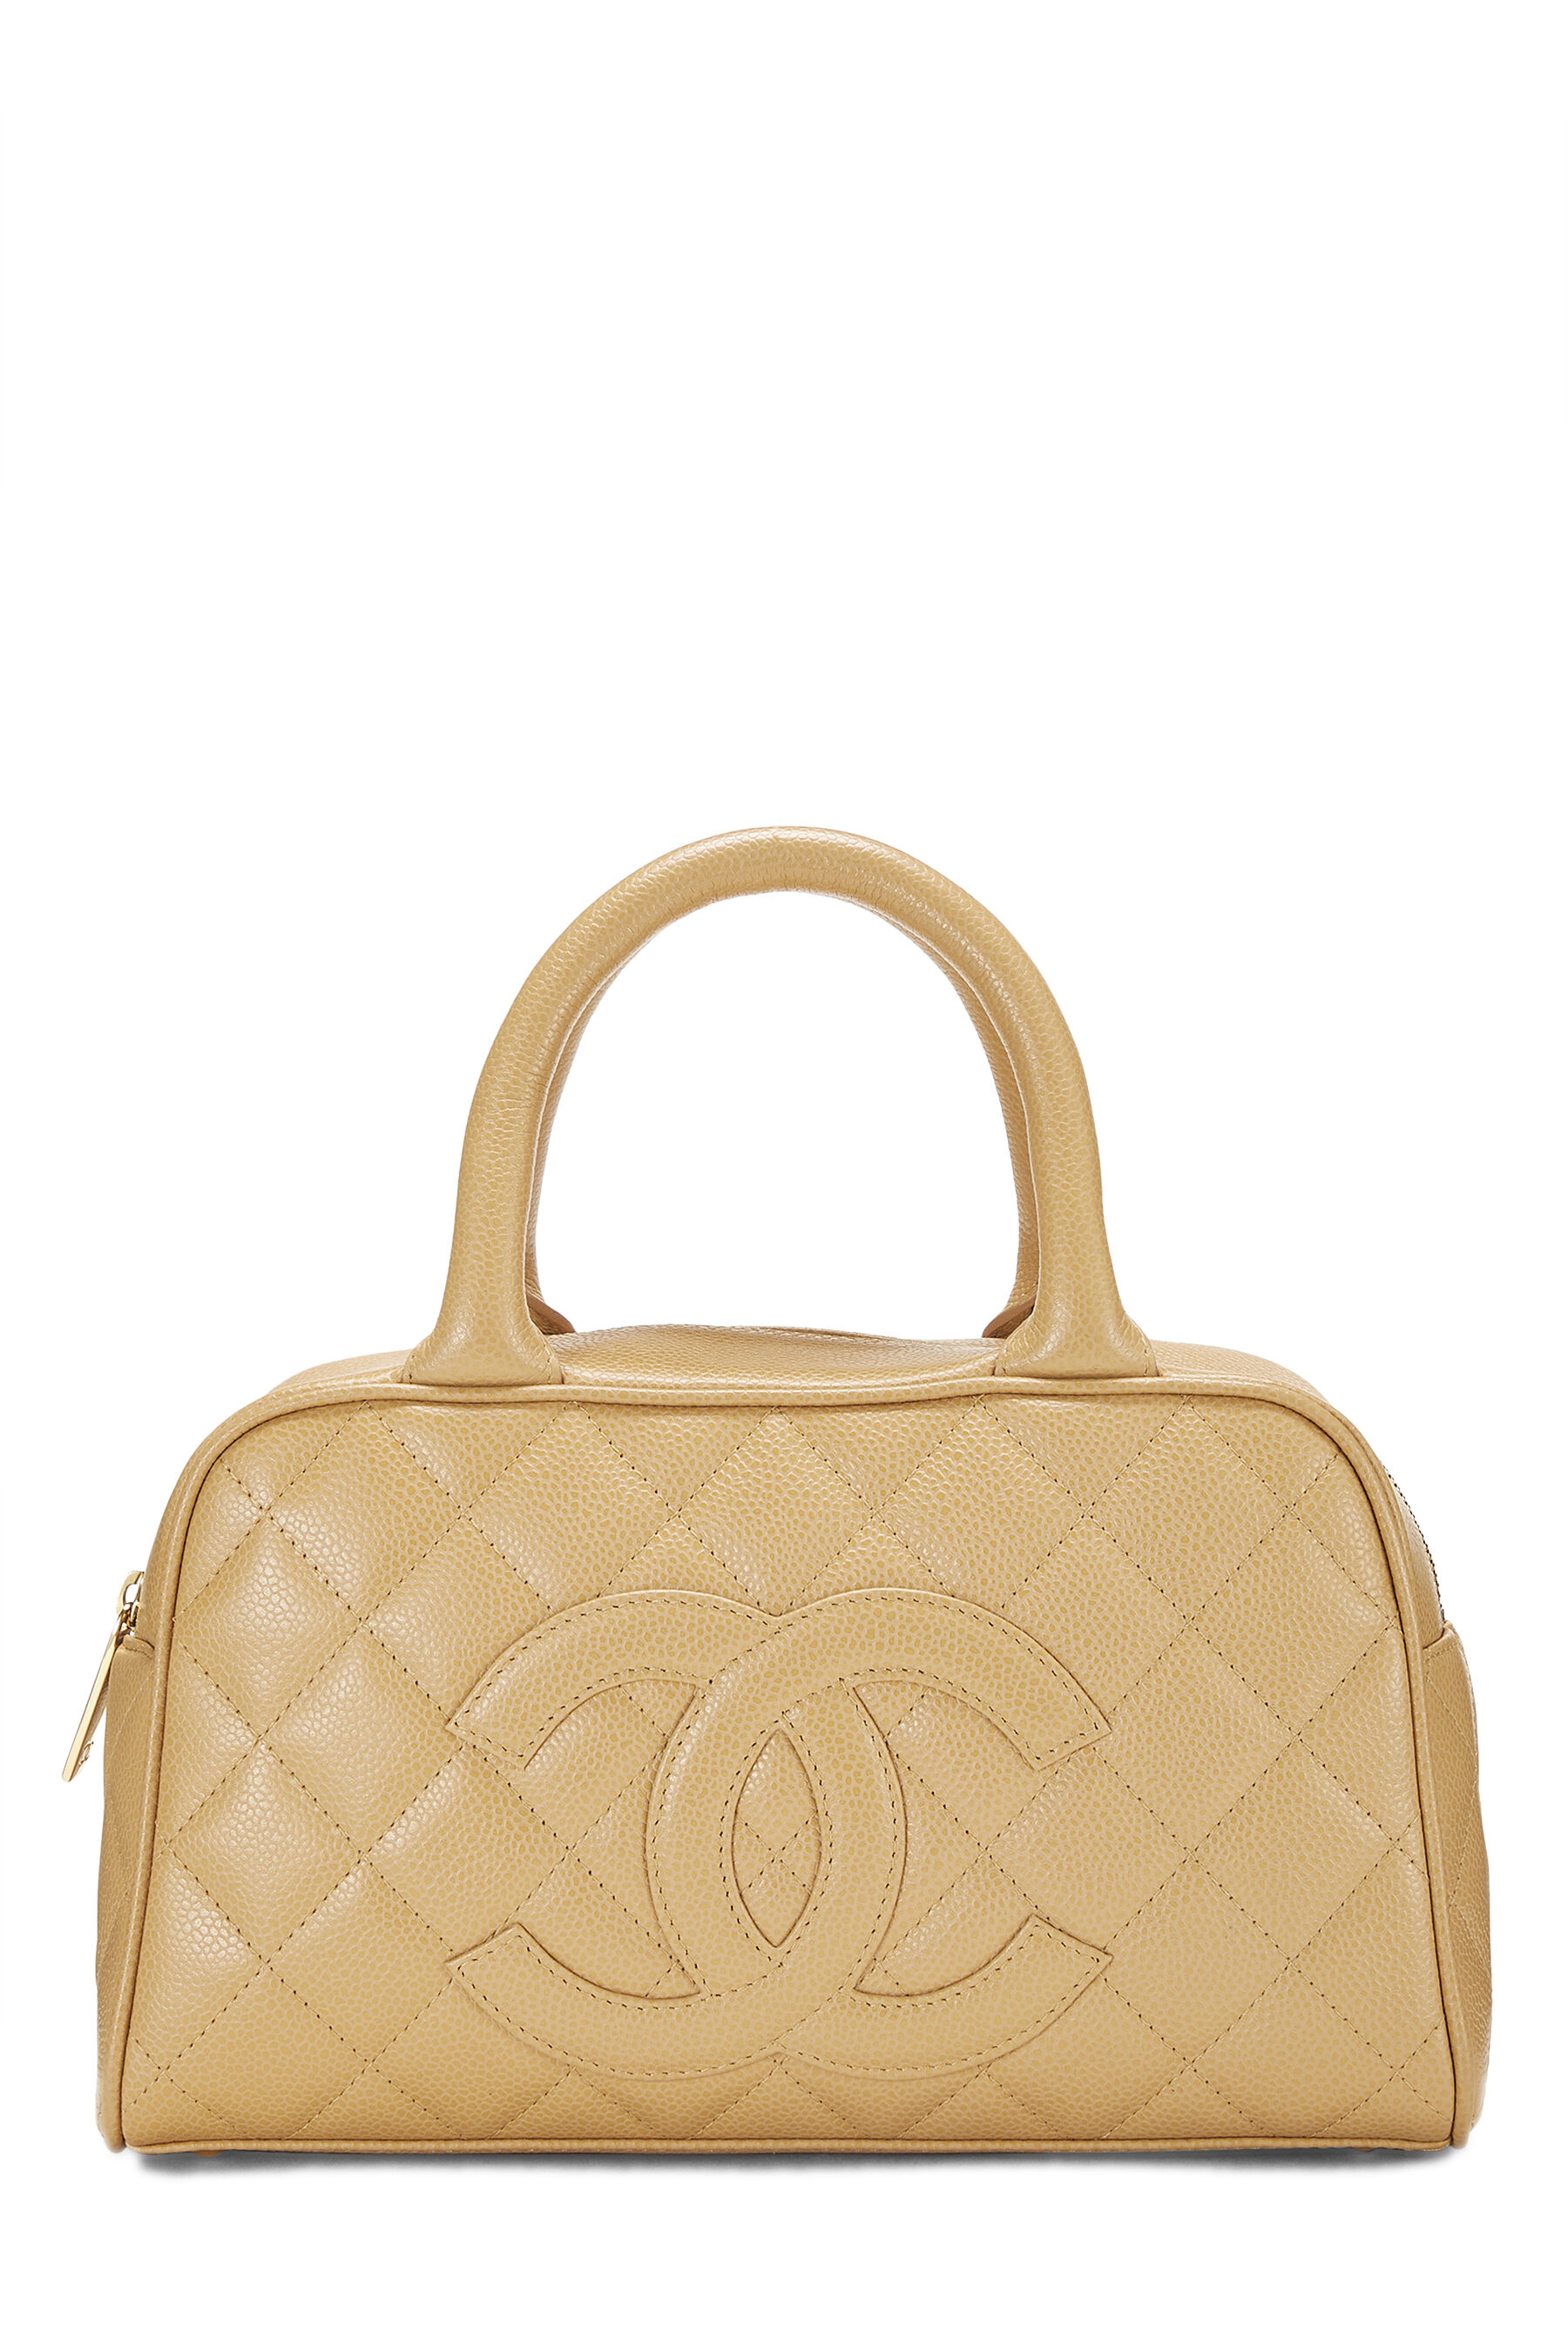 Chanel - Beige Quilted Caviar Bowler Small